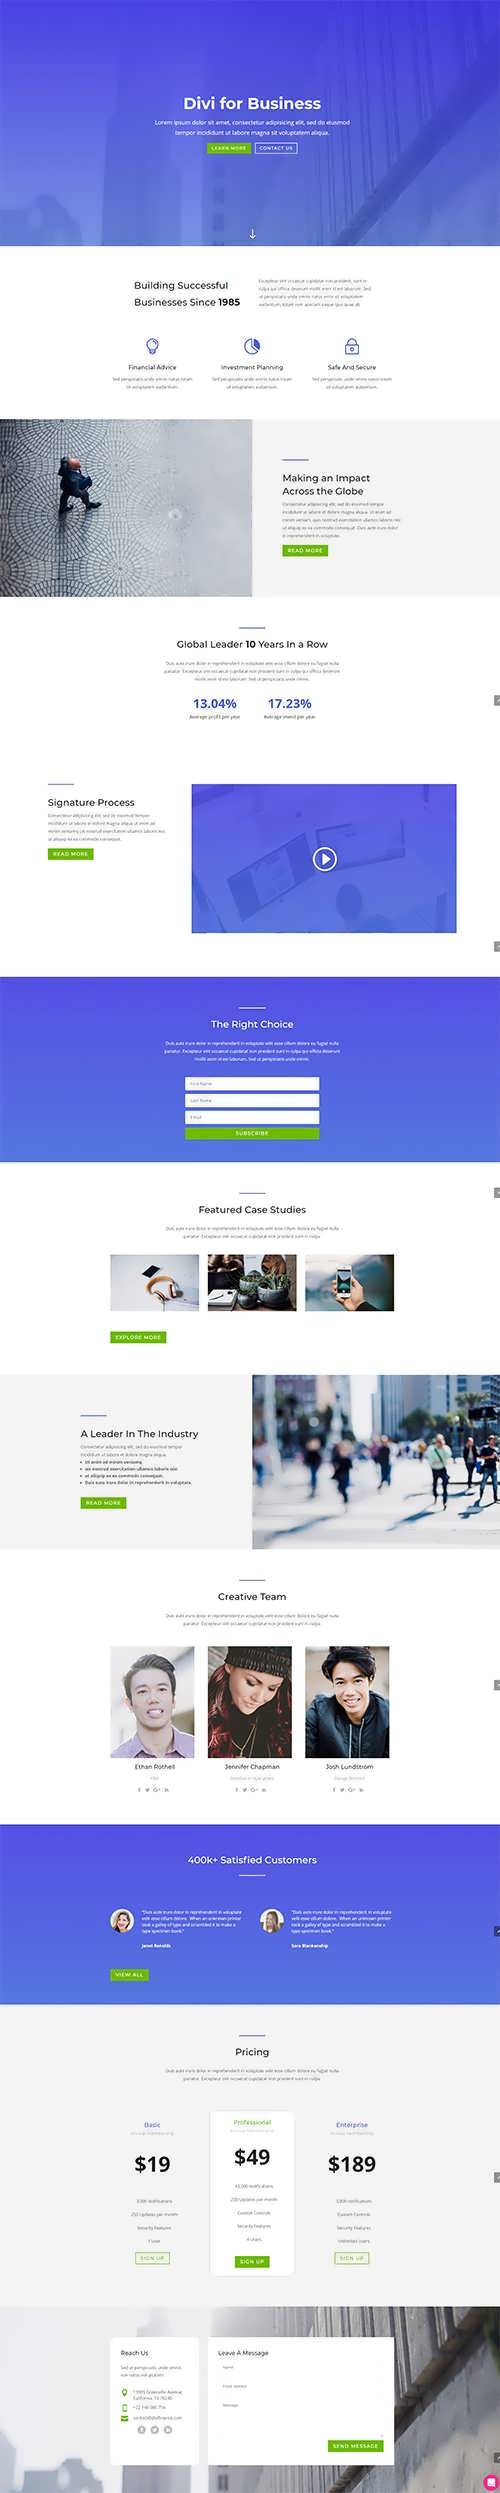 divi business layout free